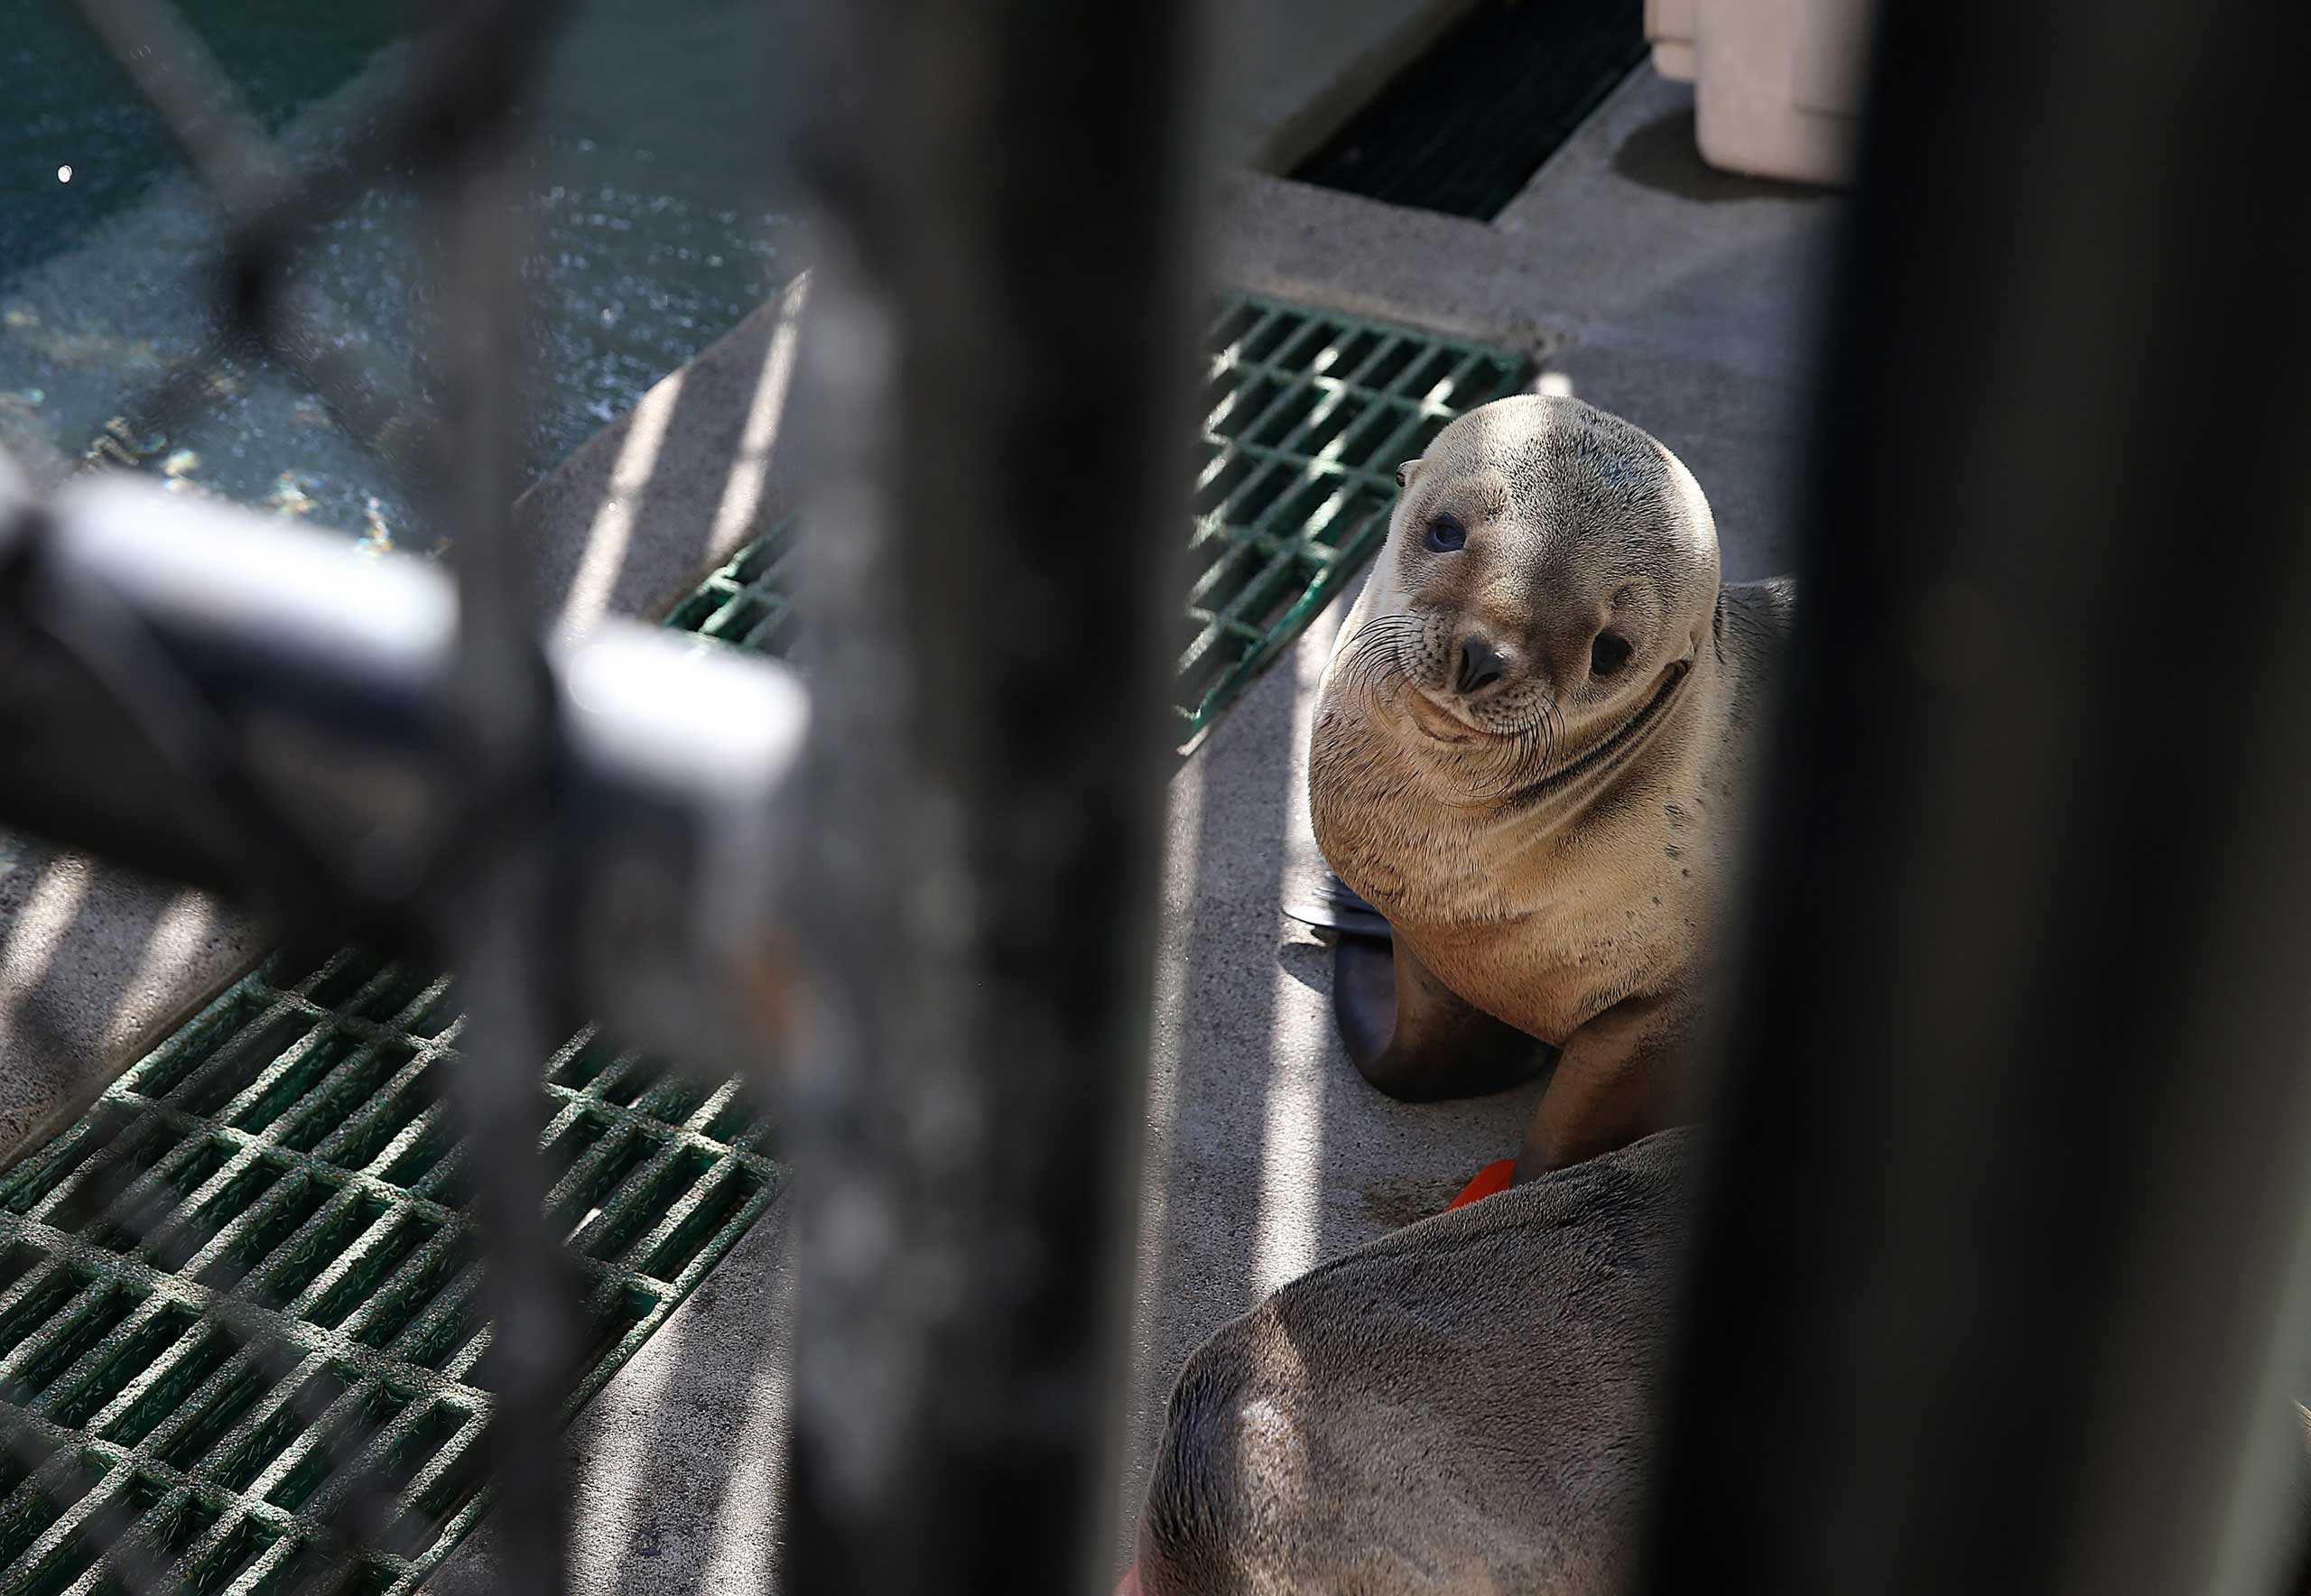 A sick California sea lion pup sits in an enclosure at the Marine Mammal Center on Feb. 12, 2015 in Sausalito, California. (Justin Sullivan&mdash;Getty Images)